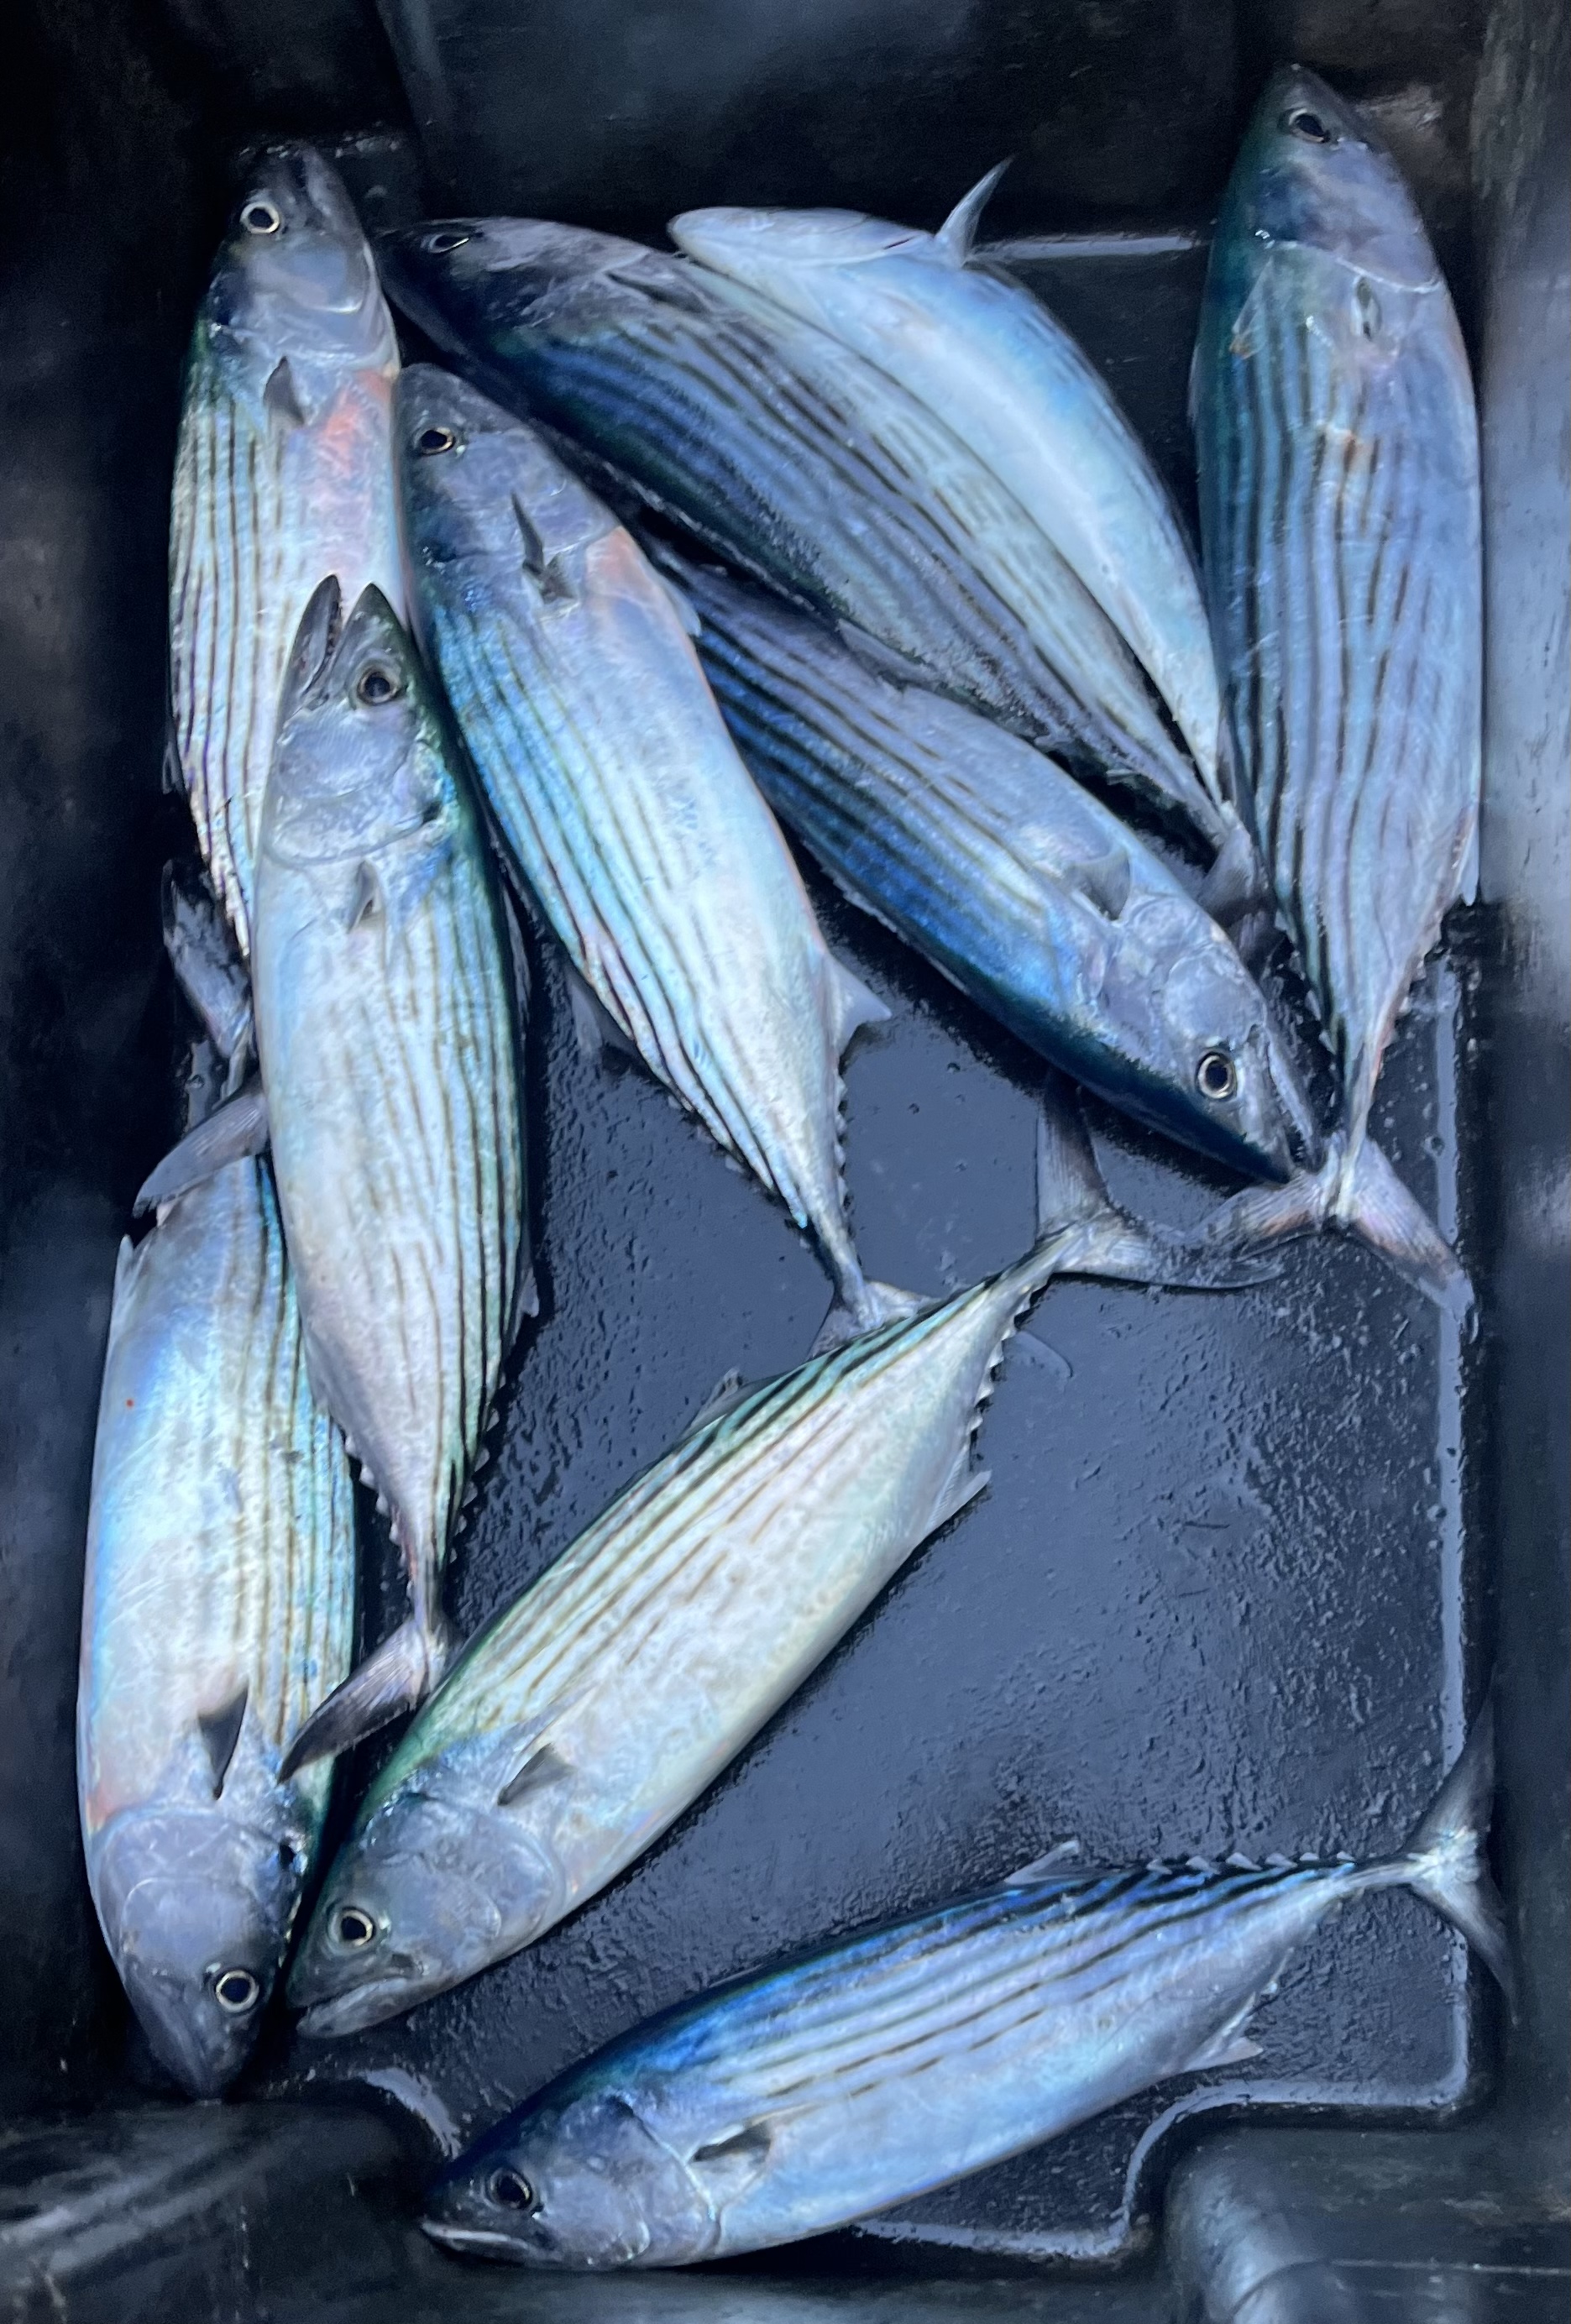 Catching slimy mackerel and pilchards? - Fishing Chat - DECKEE Community